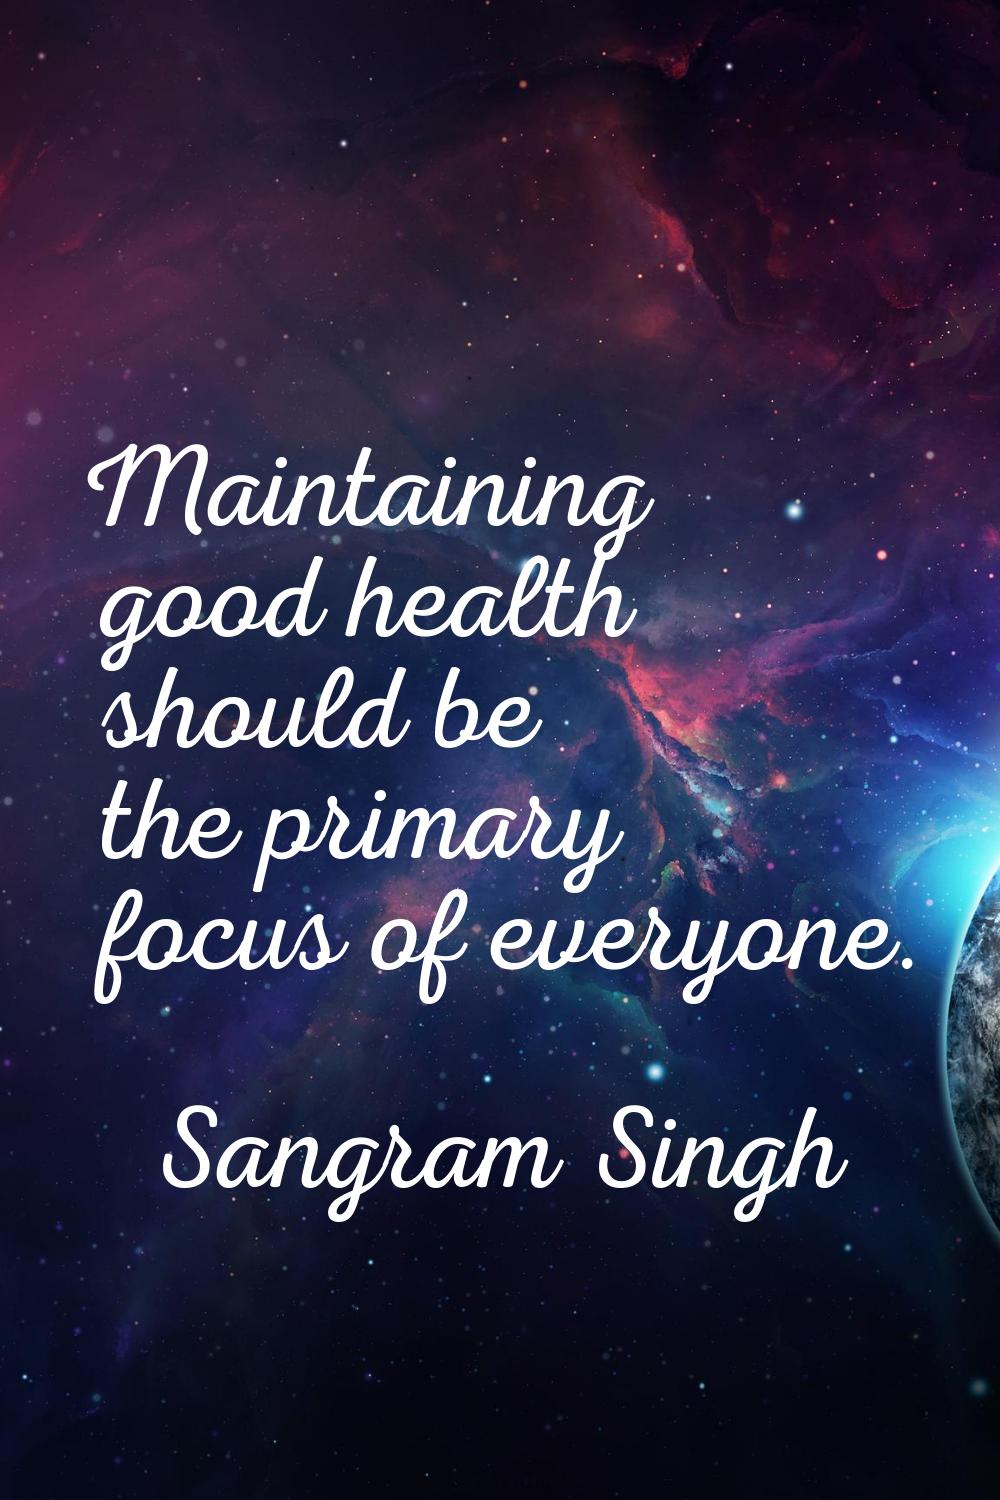 Maintaining good health should be the primary focus of everyone.